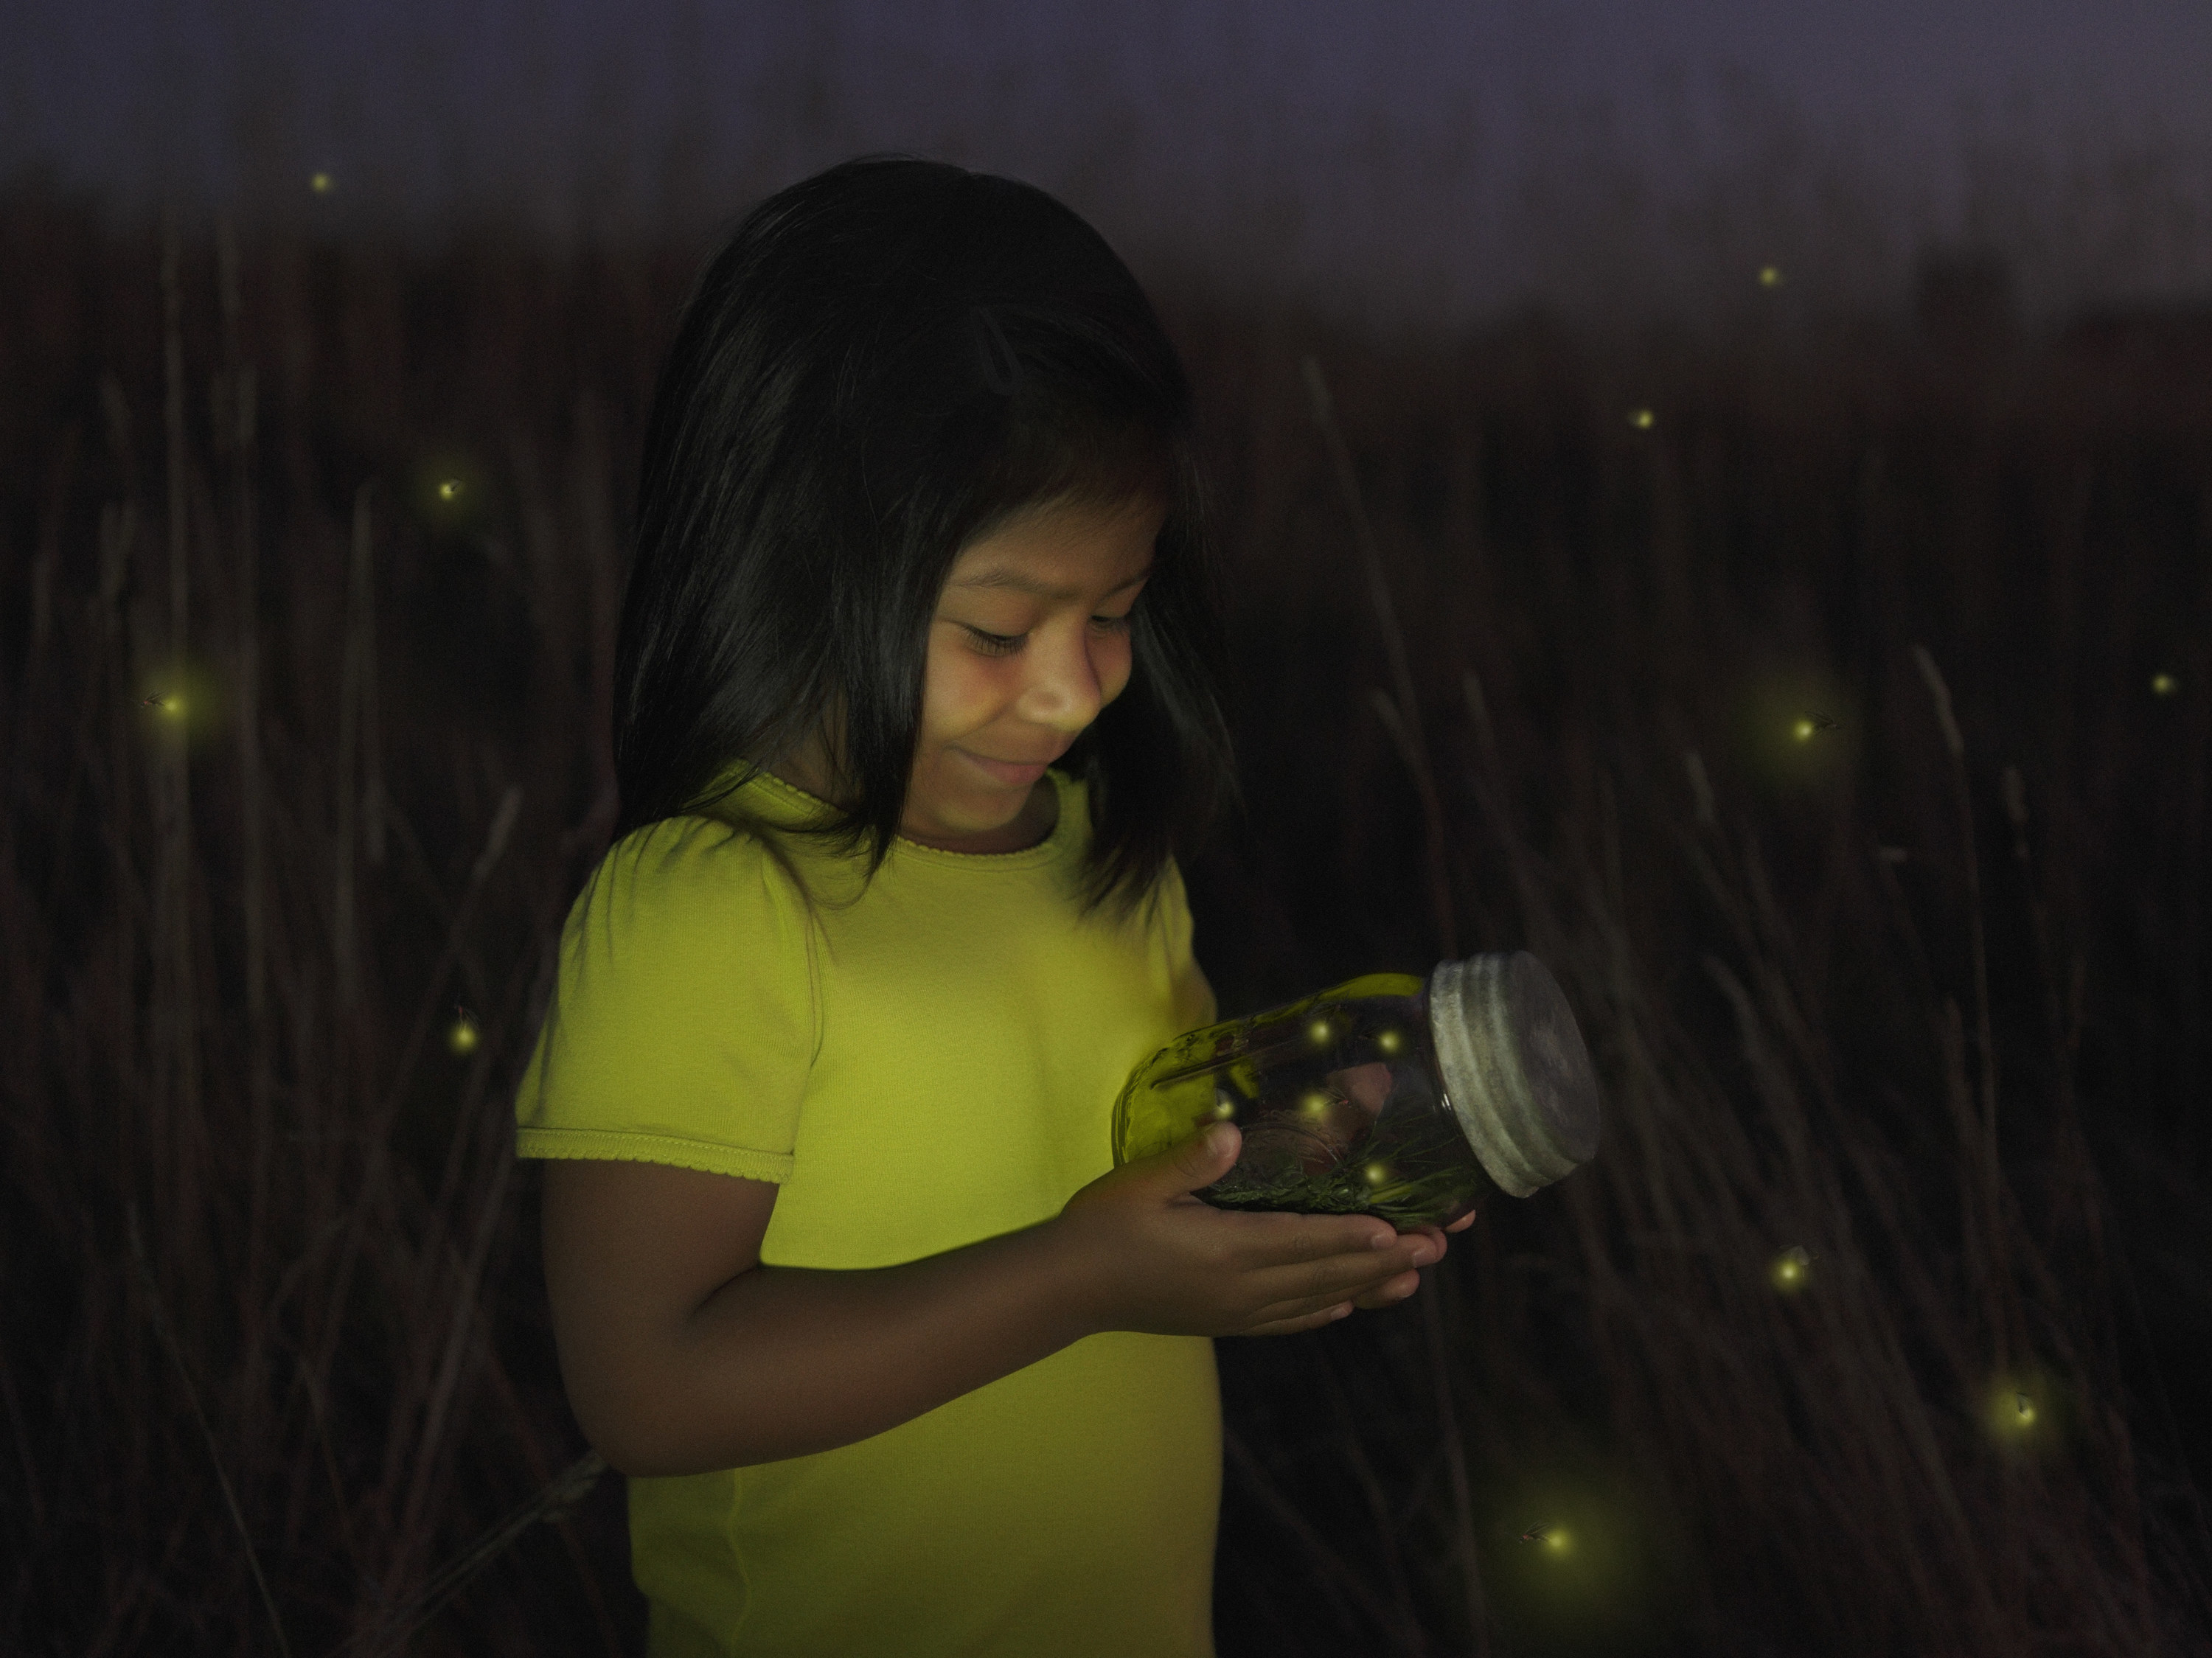 A young girl catches fireflies in a jar